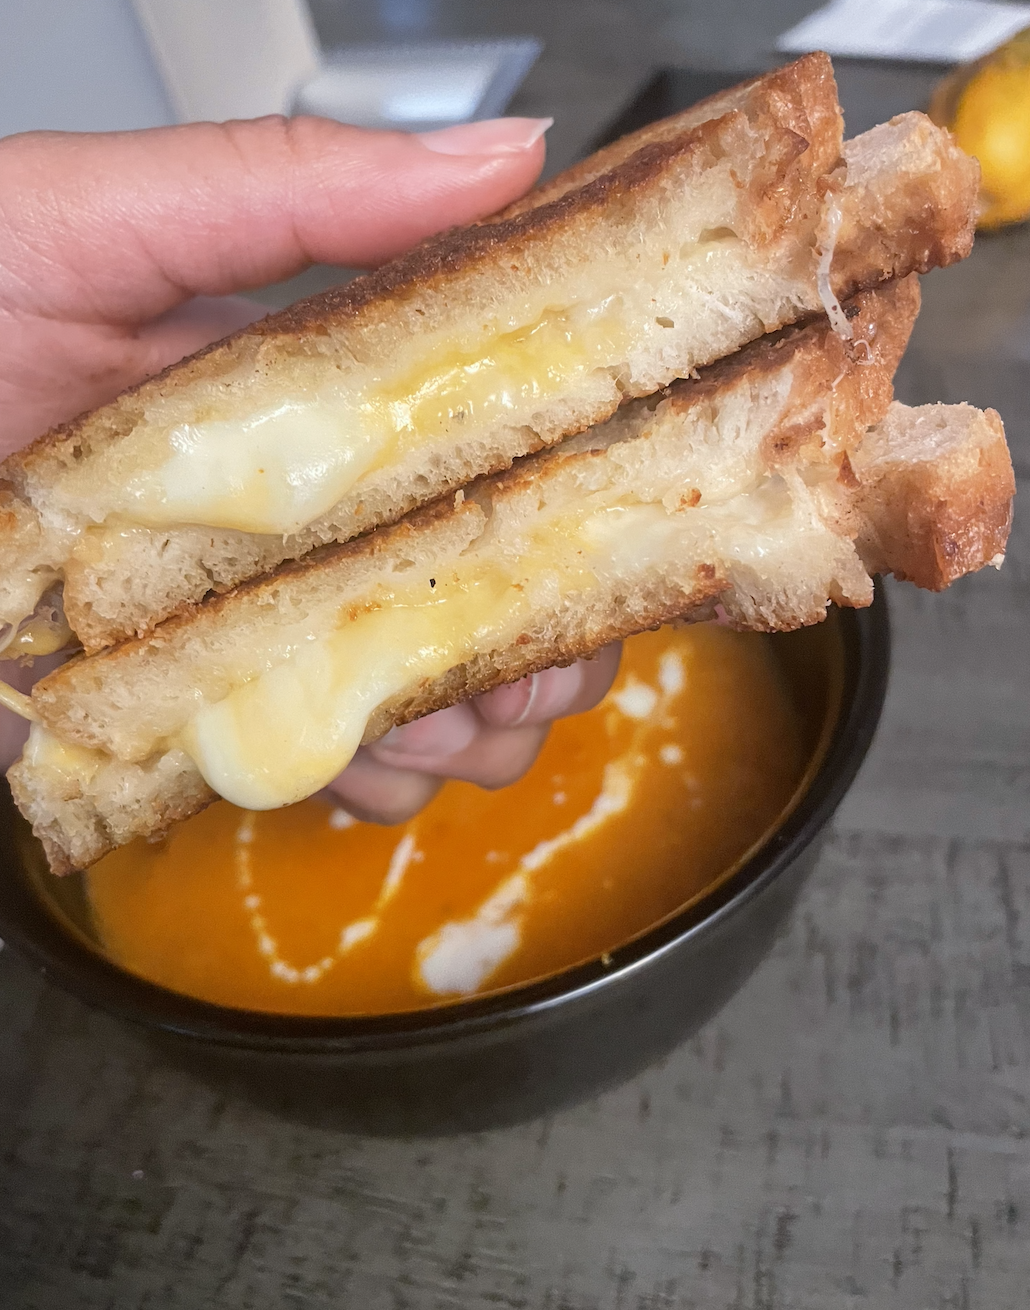 Grilled cheese sad which and tomato basil soup